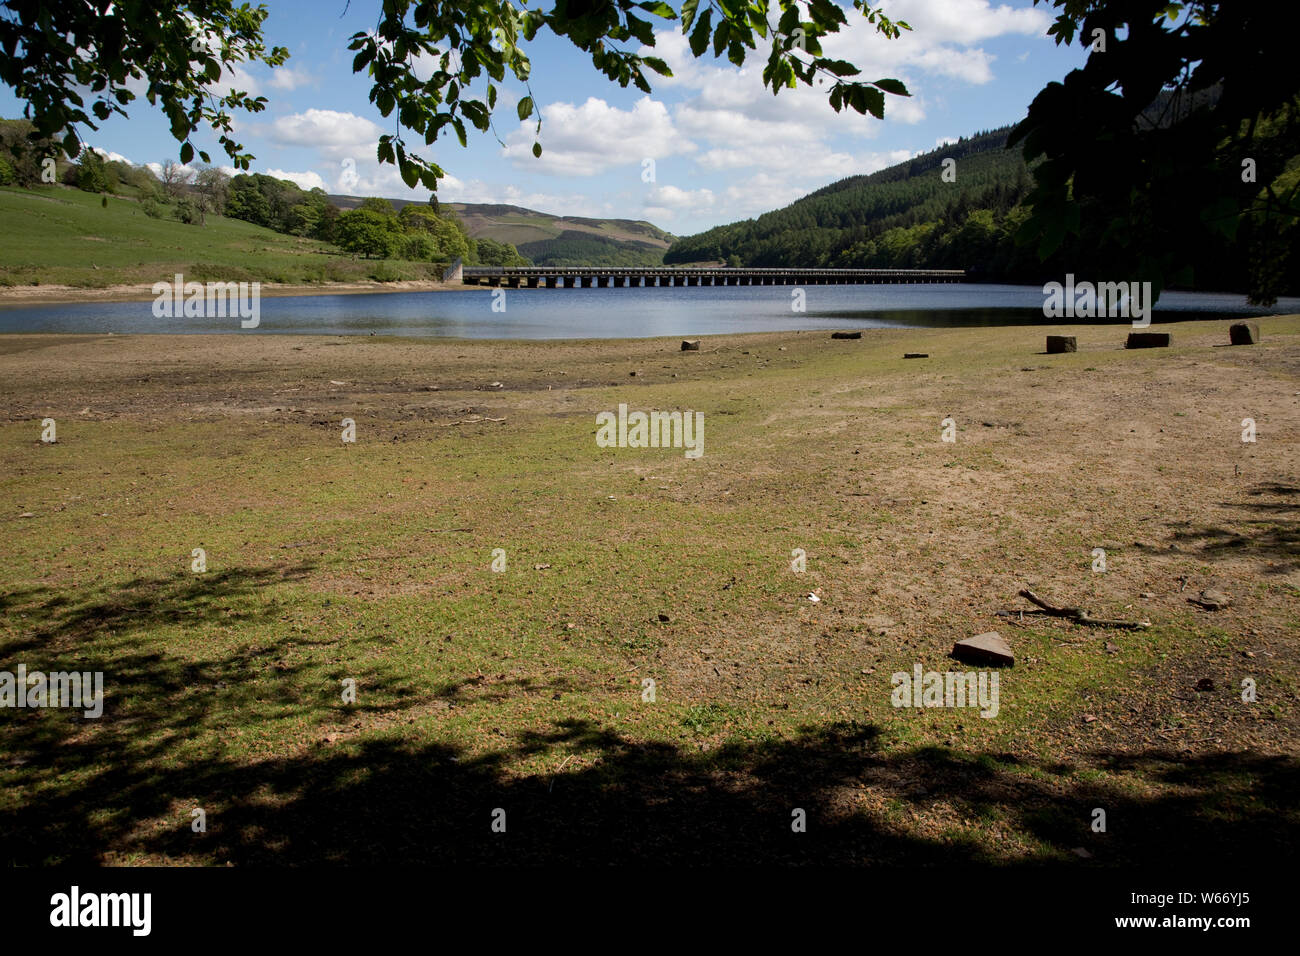 Low water level in the Ladybower Reservoir, the largest (holding 6300 million gallons) of three water storage reservoirs in the Derwent Valley, Peak D Stock Photo